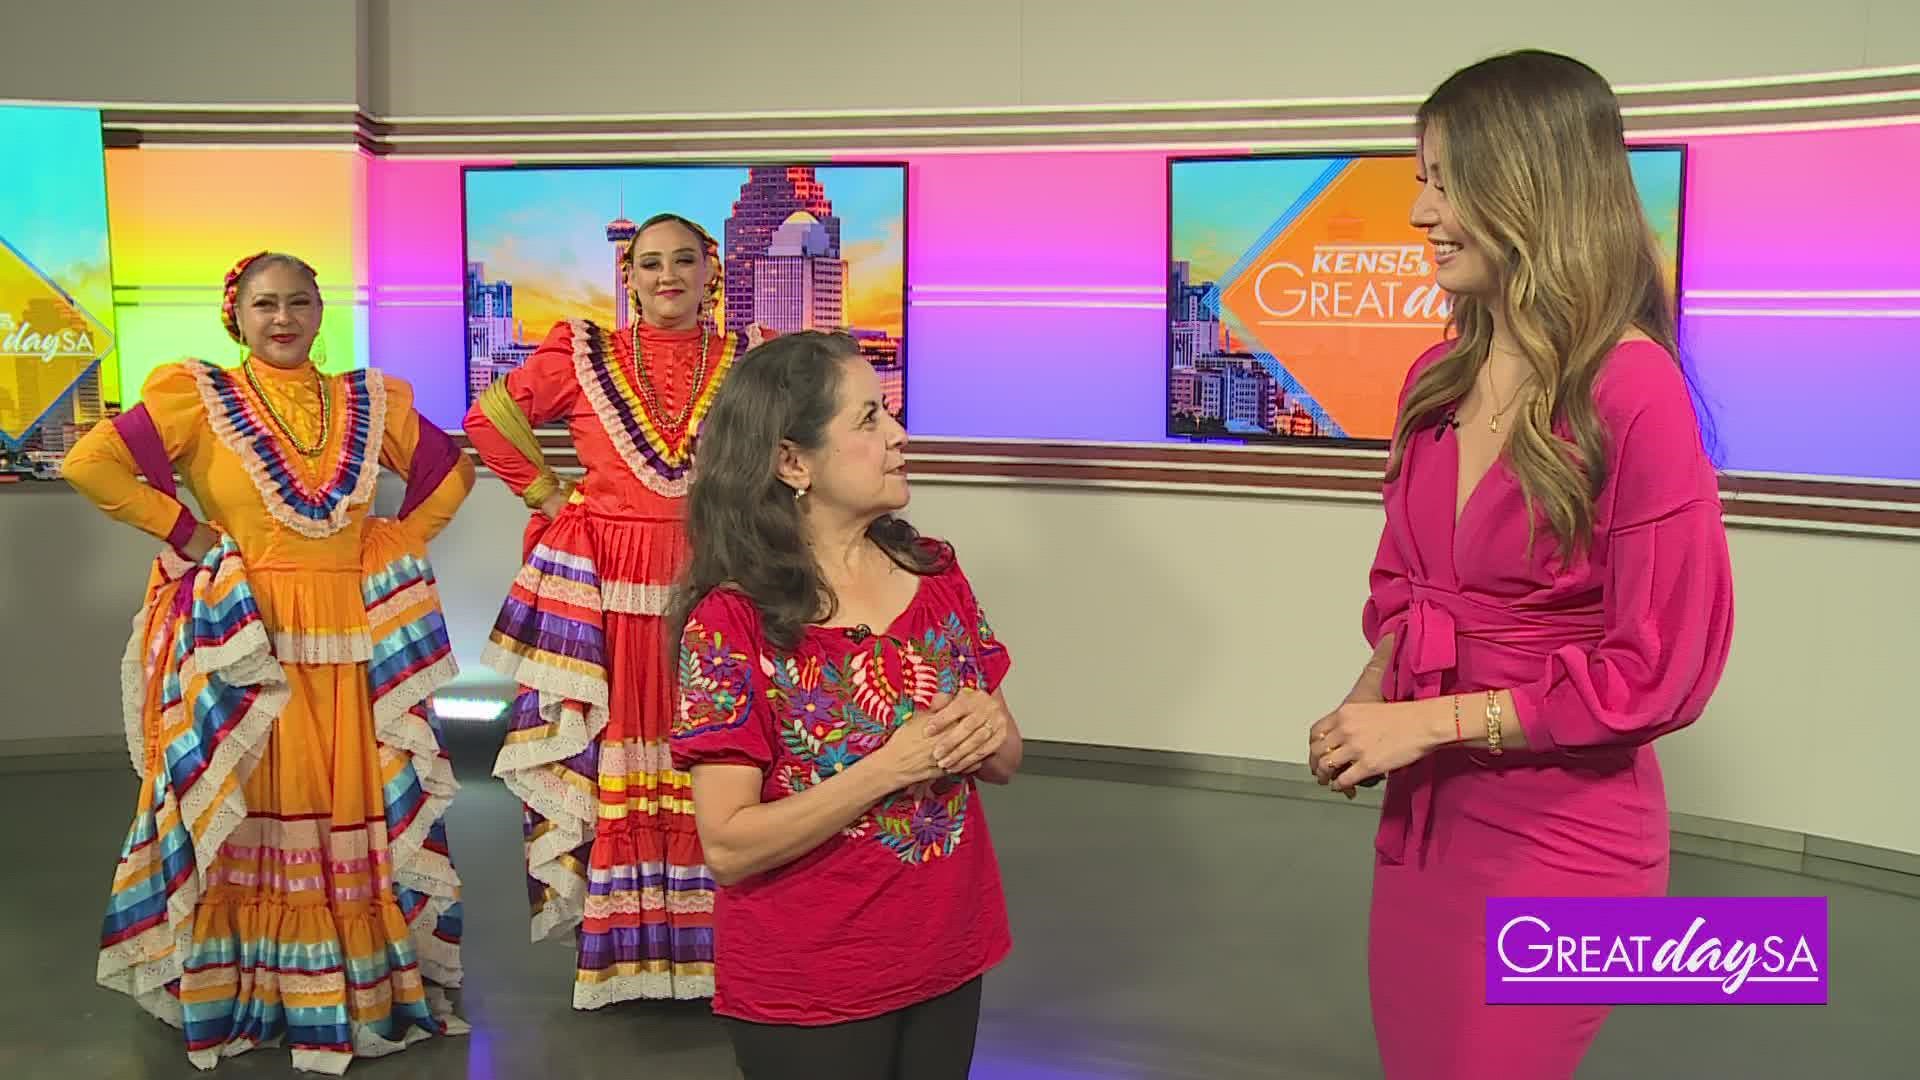 We're still celebrating Hispanic Heritage Month and The Guadalupe Cultural Arts Center is getting ready for their Fiestas Patrias event! Roma got a sneak peek.